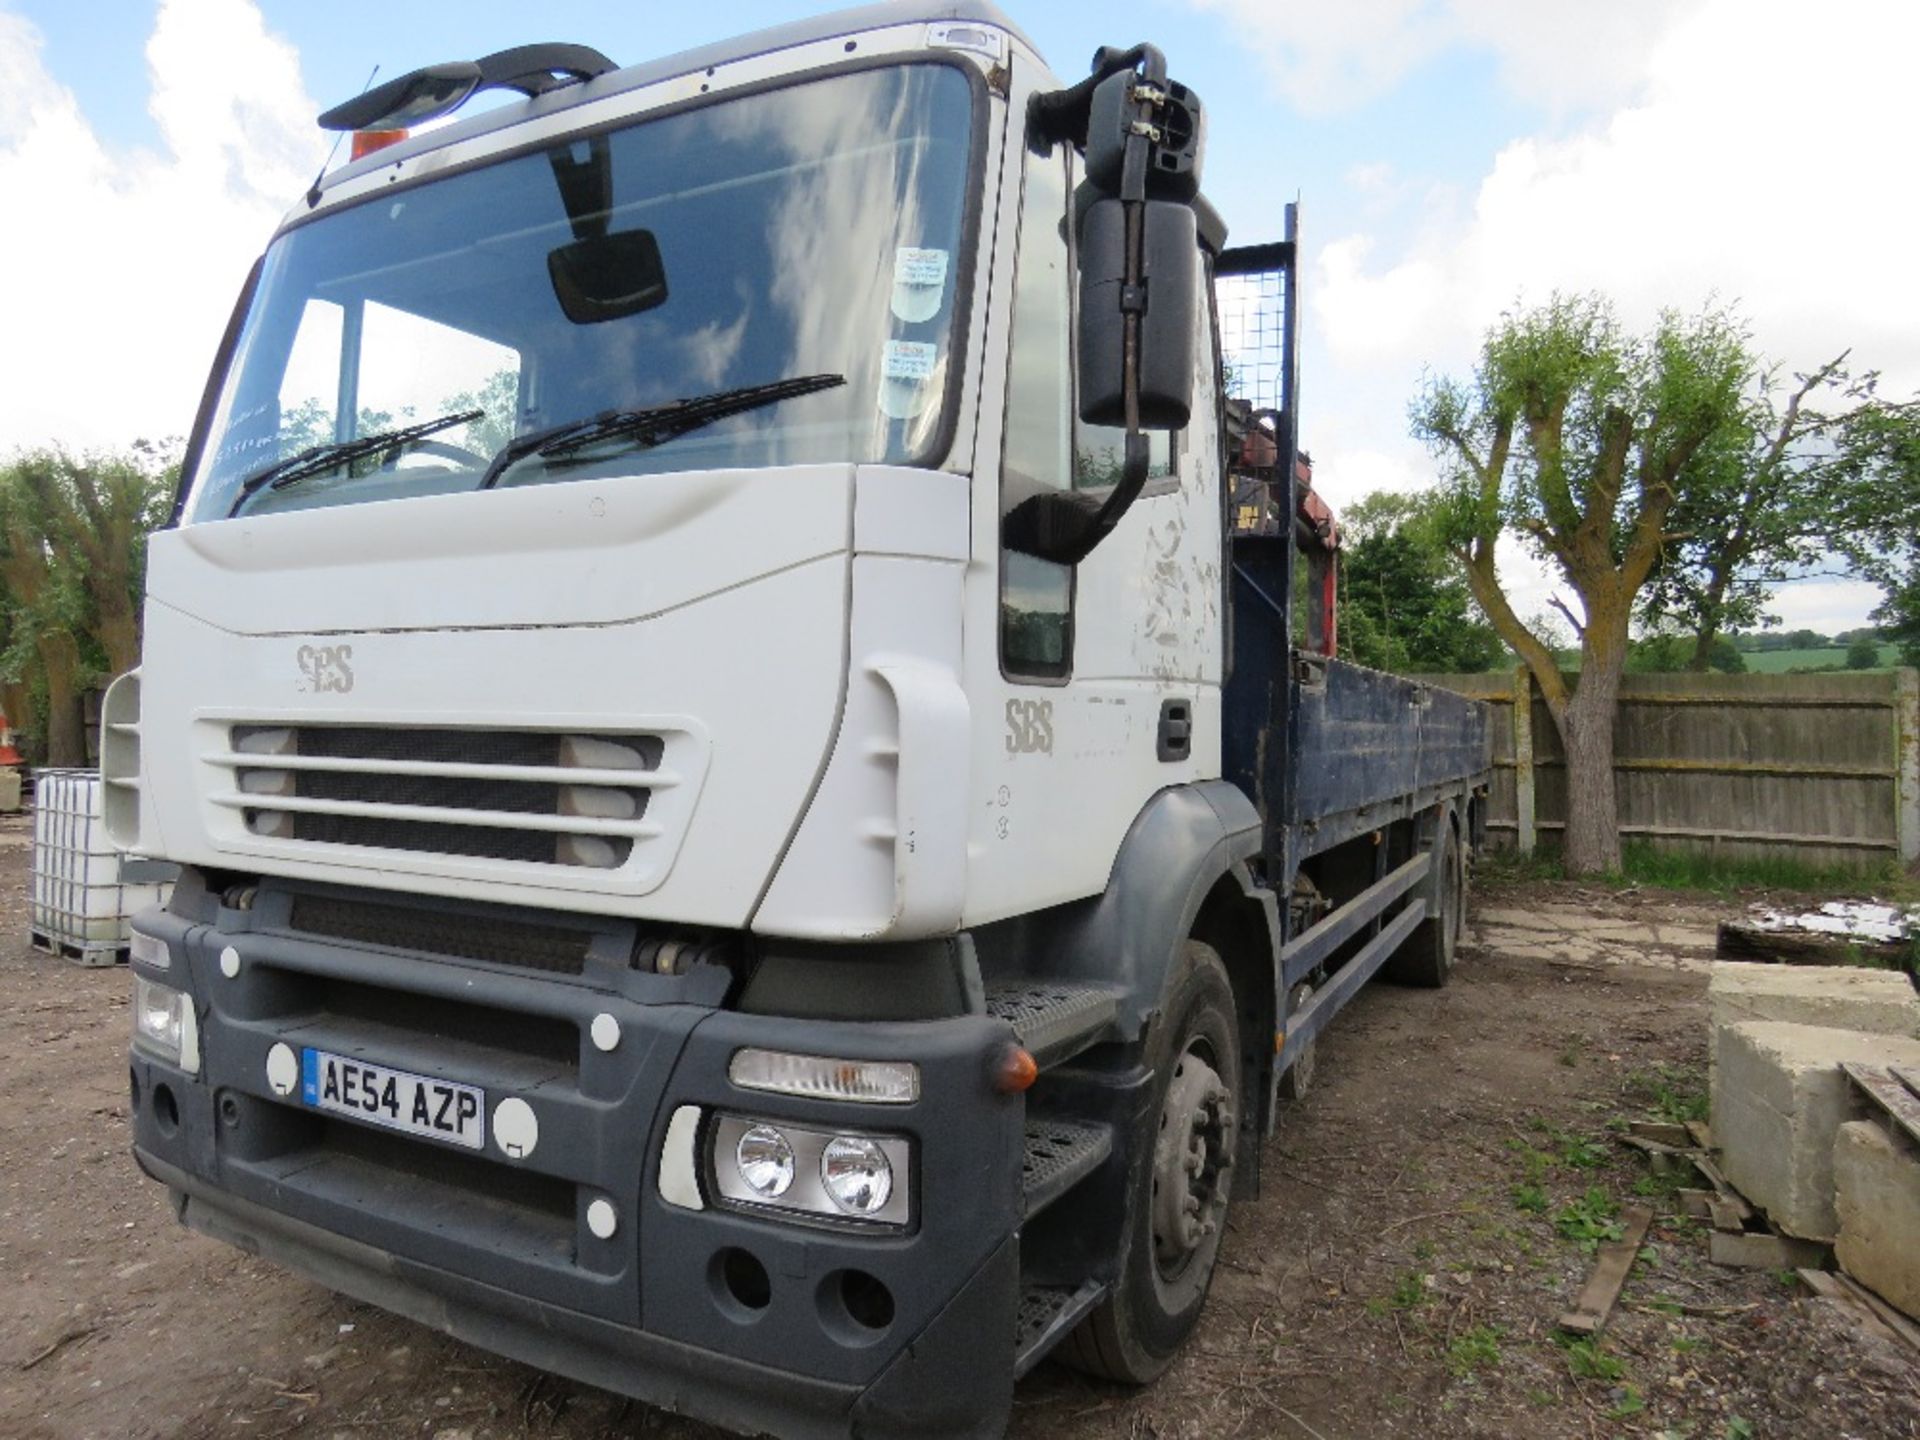 IVECO 6X2 DROP SIDE 26TONNE LORRY REG: AE54 AZP WITH REAR PALFINGER PK1200 CRANE AND BLOCK GRAB, - Image 13 of 14